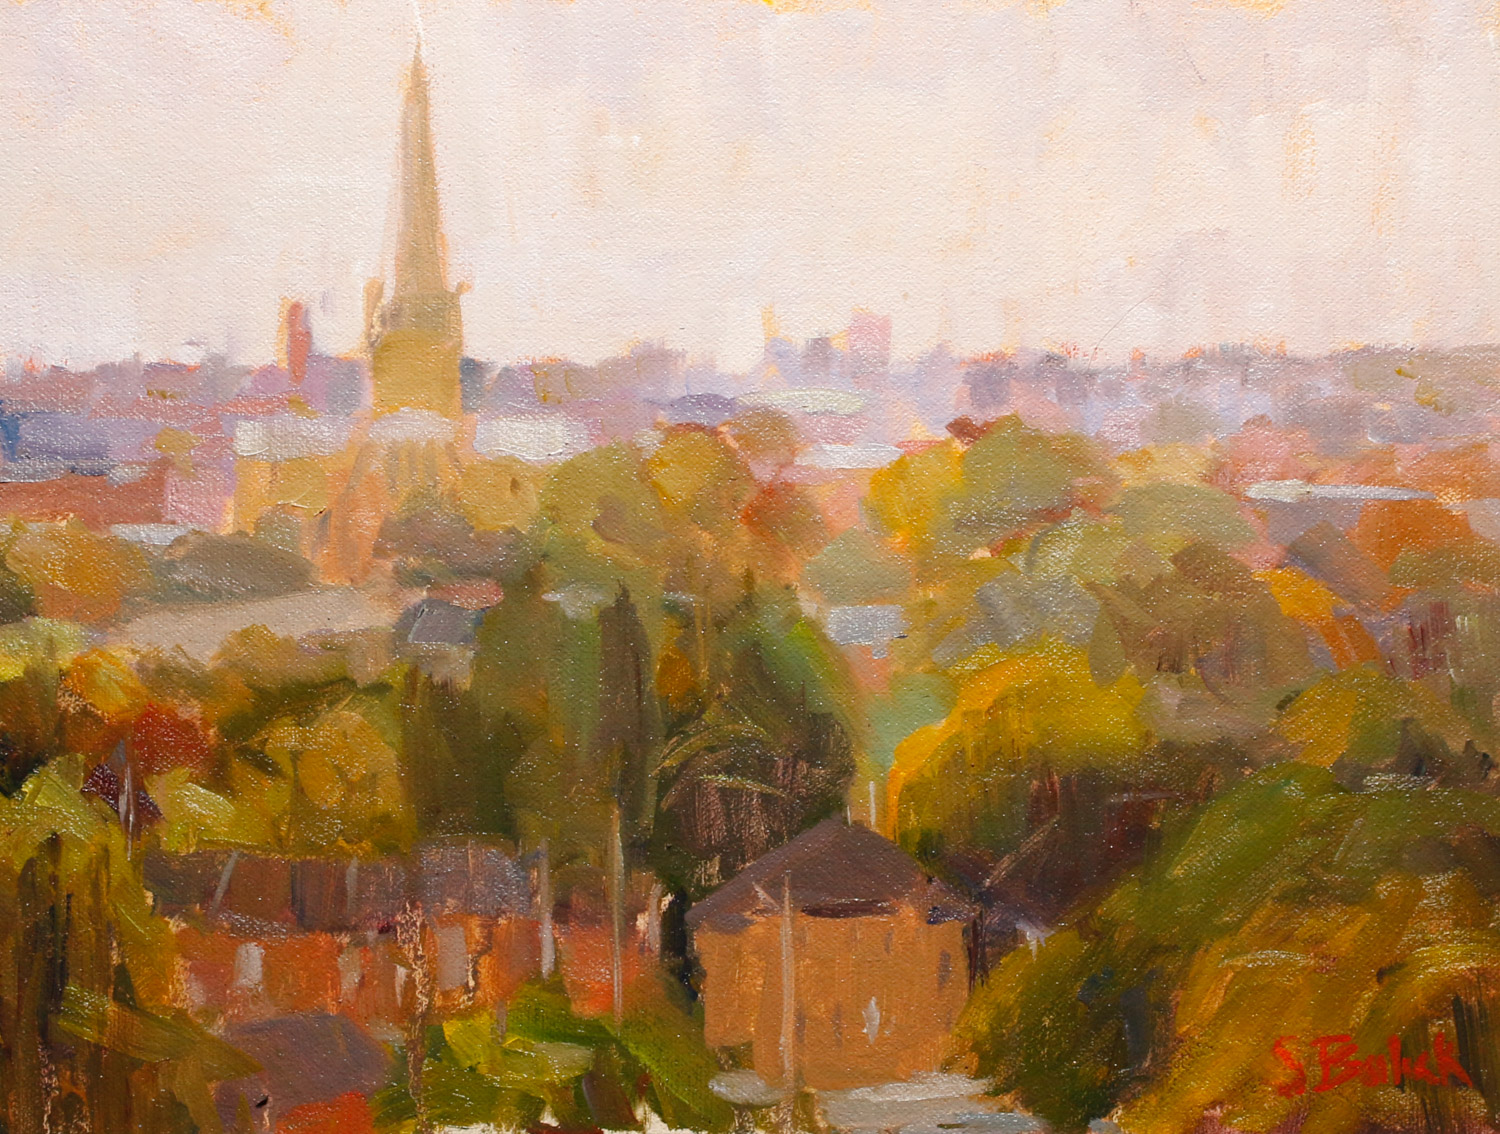 Artist Sally Balick - Overlook from Mousehold Heath, £350 9x12 Oil on Board at Paint Out Norwich 2015